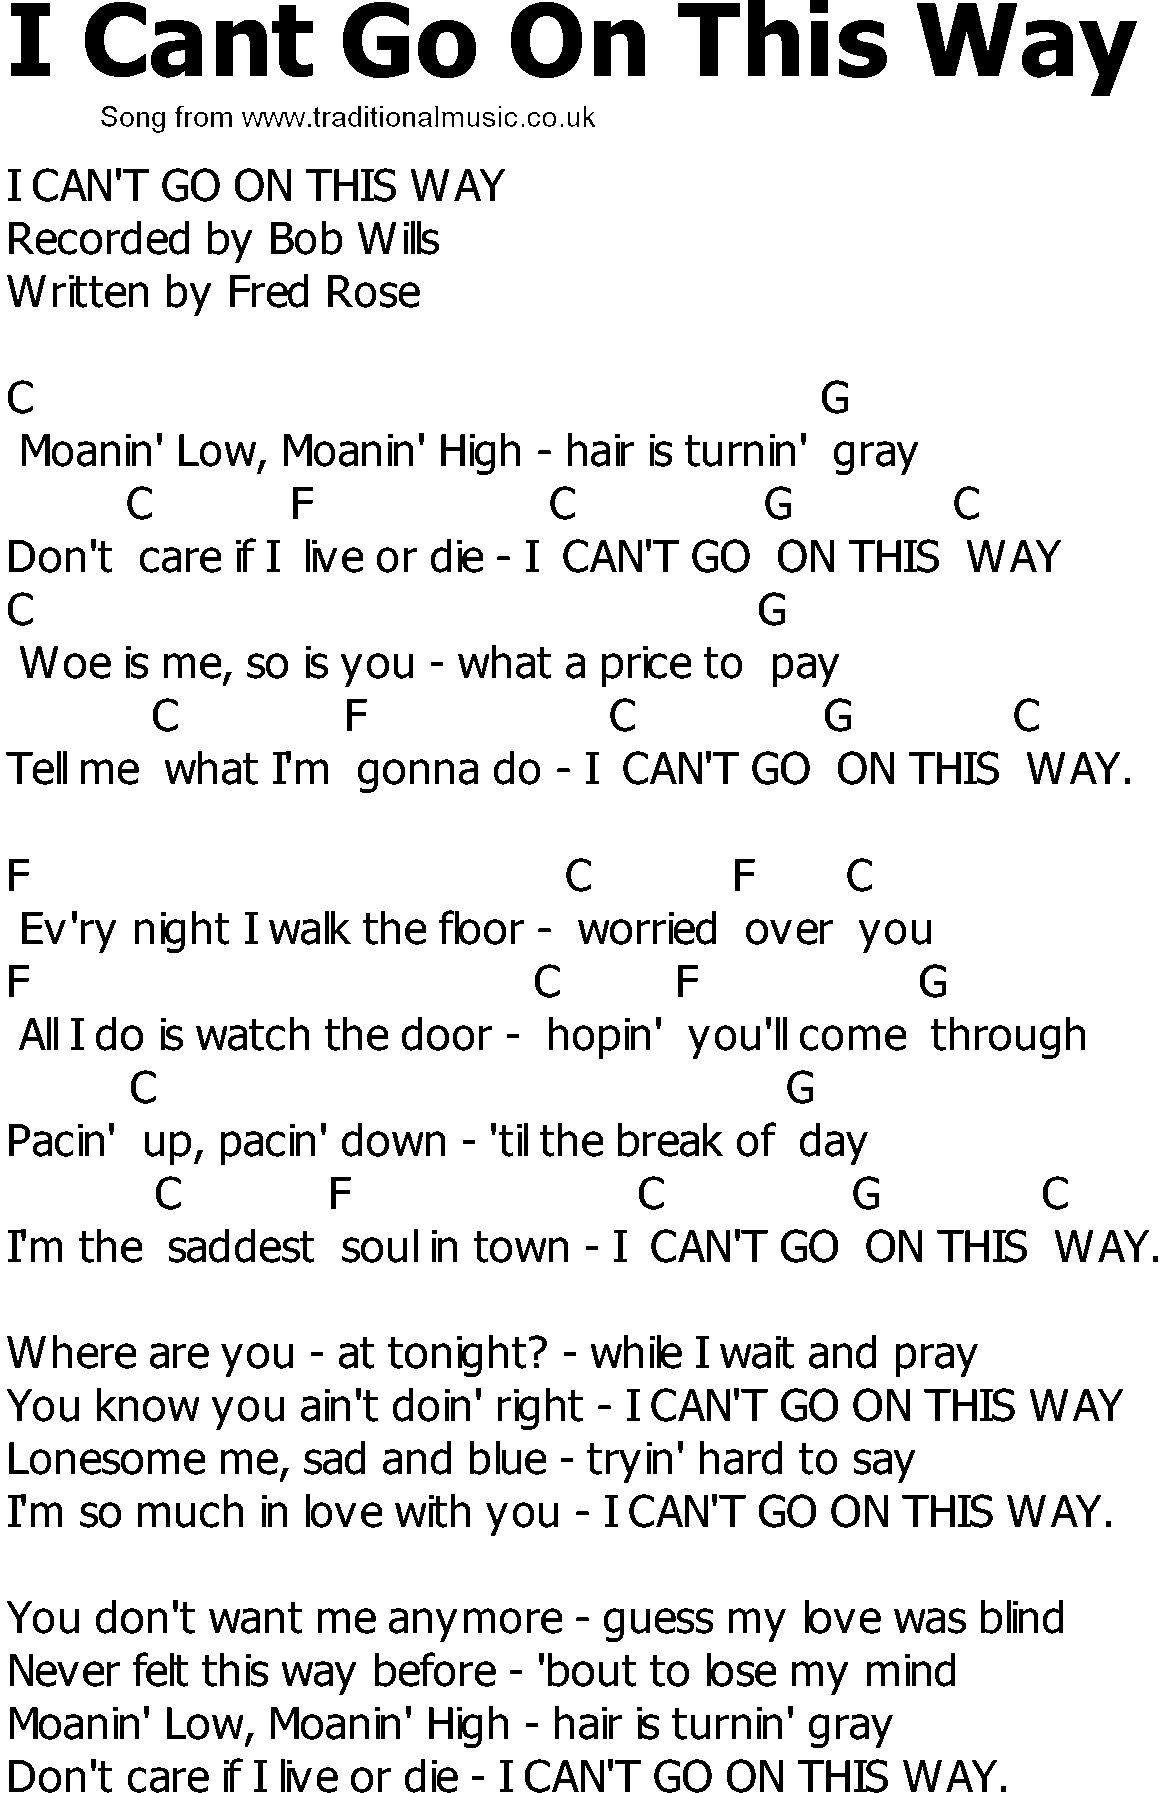 Old Country song lyrics with chords - I Cant Go On This Way